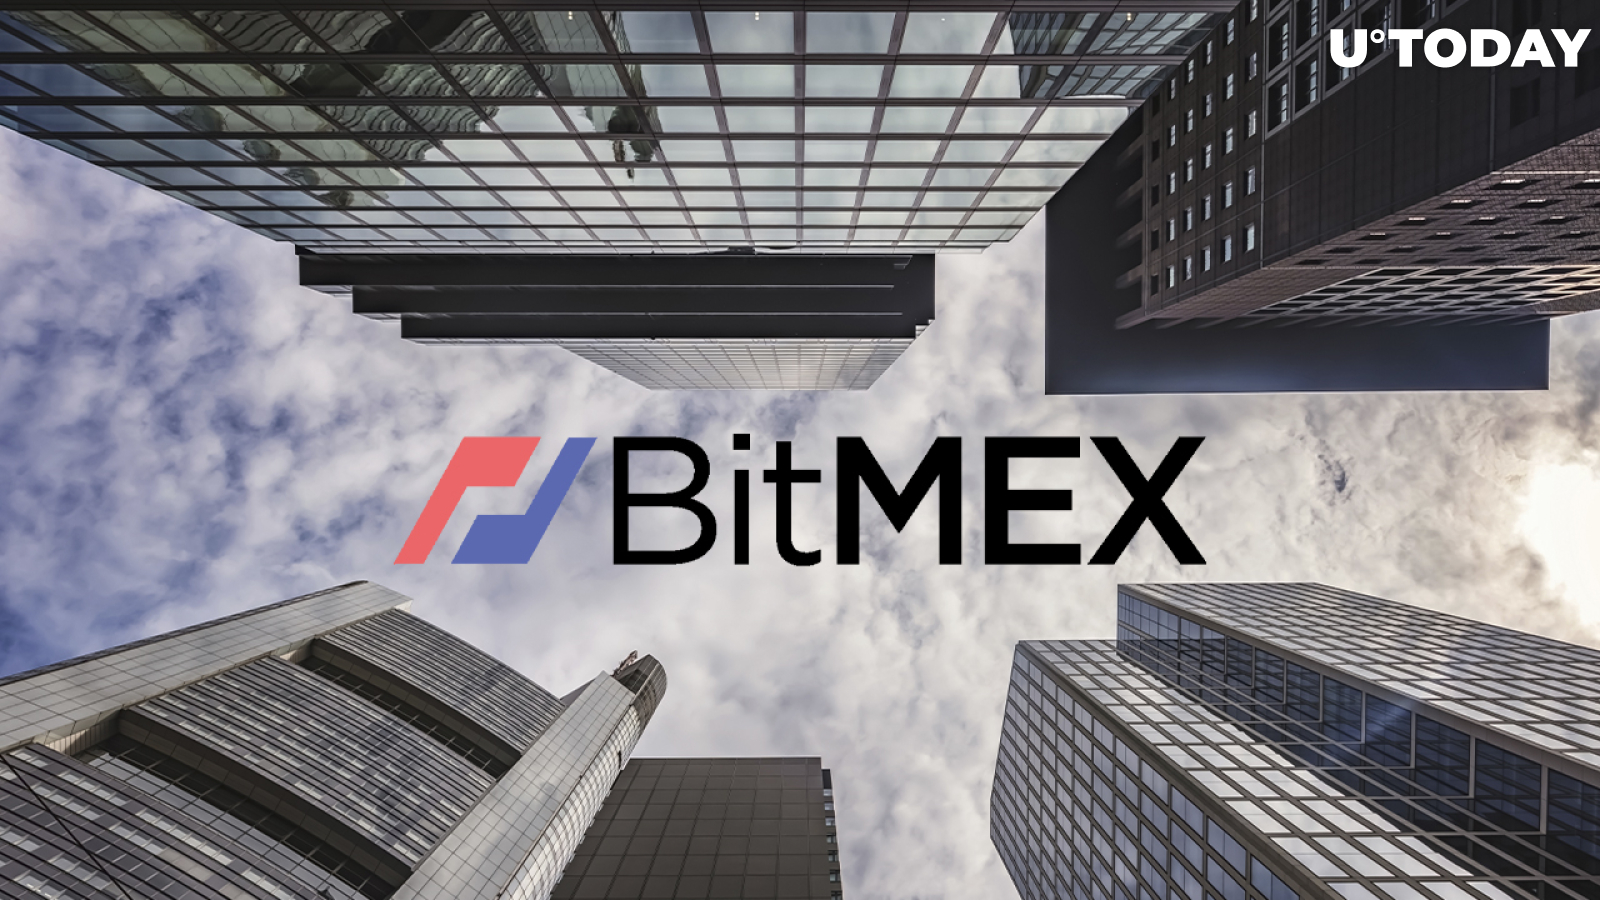  BitMEX Group to Acquire One of Oldest Banks in Germany